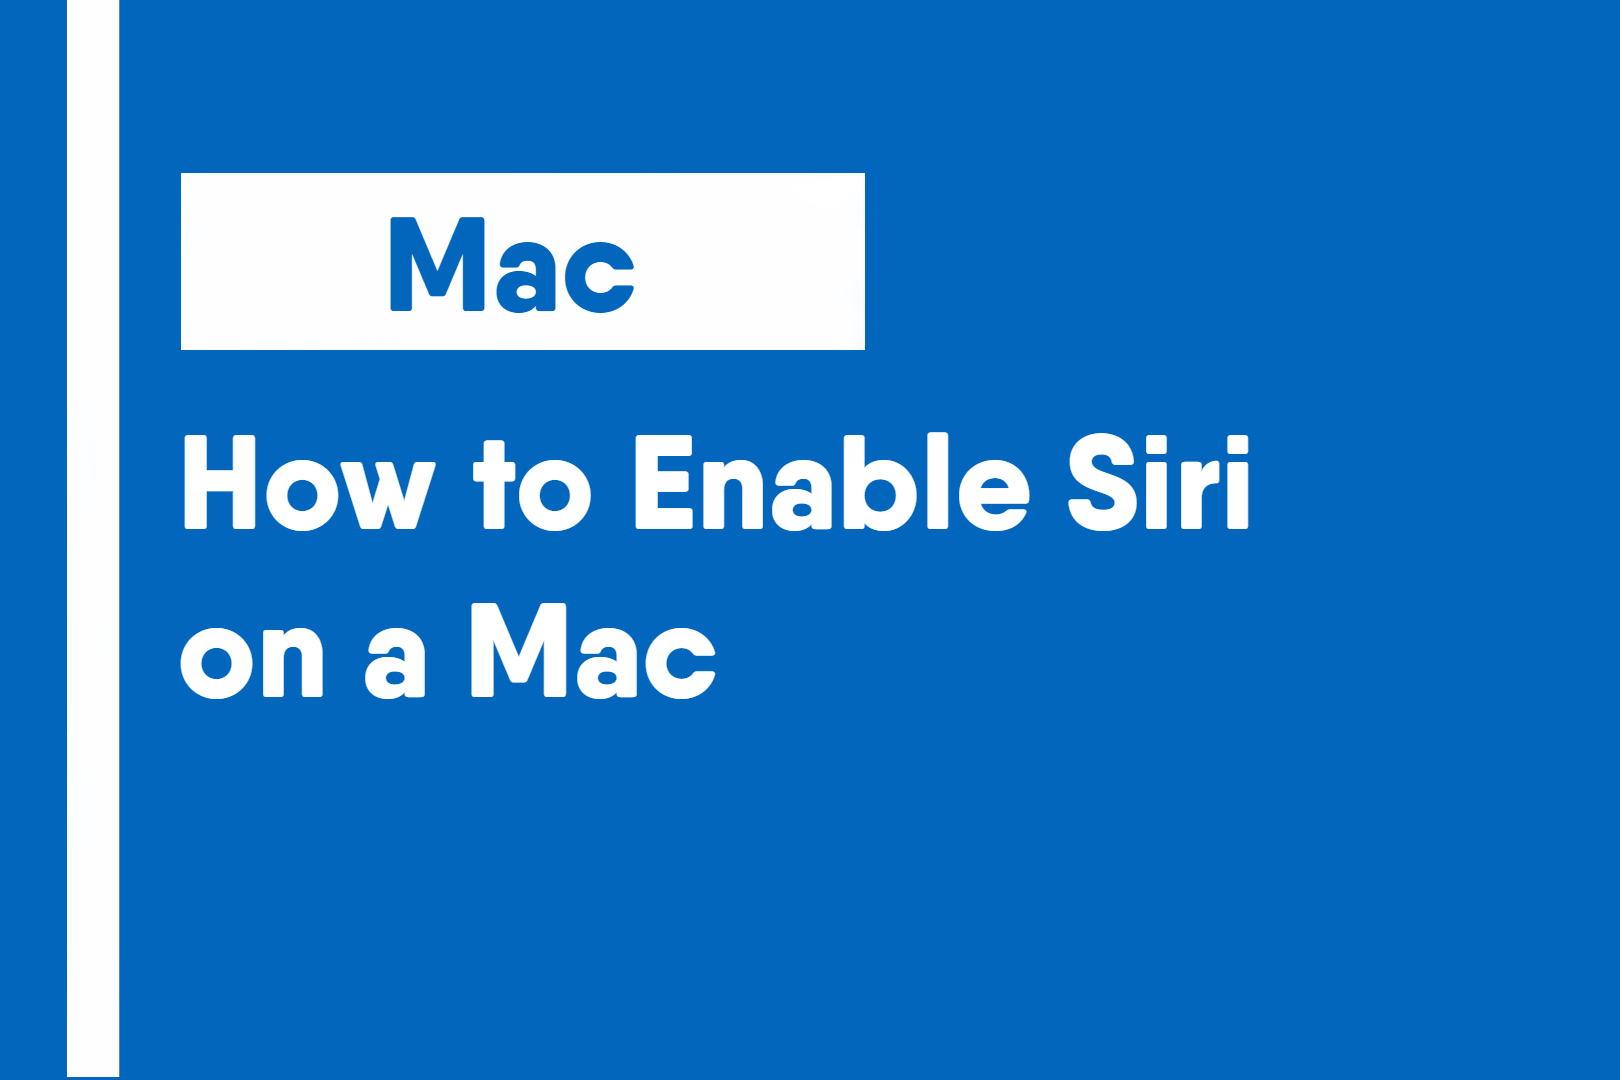 How to Enable Siri on a Mac